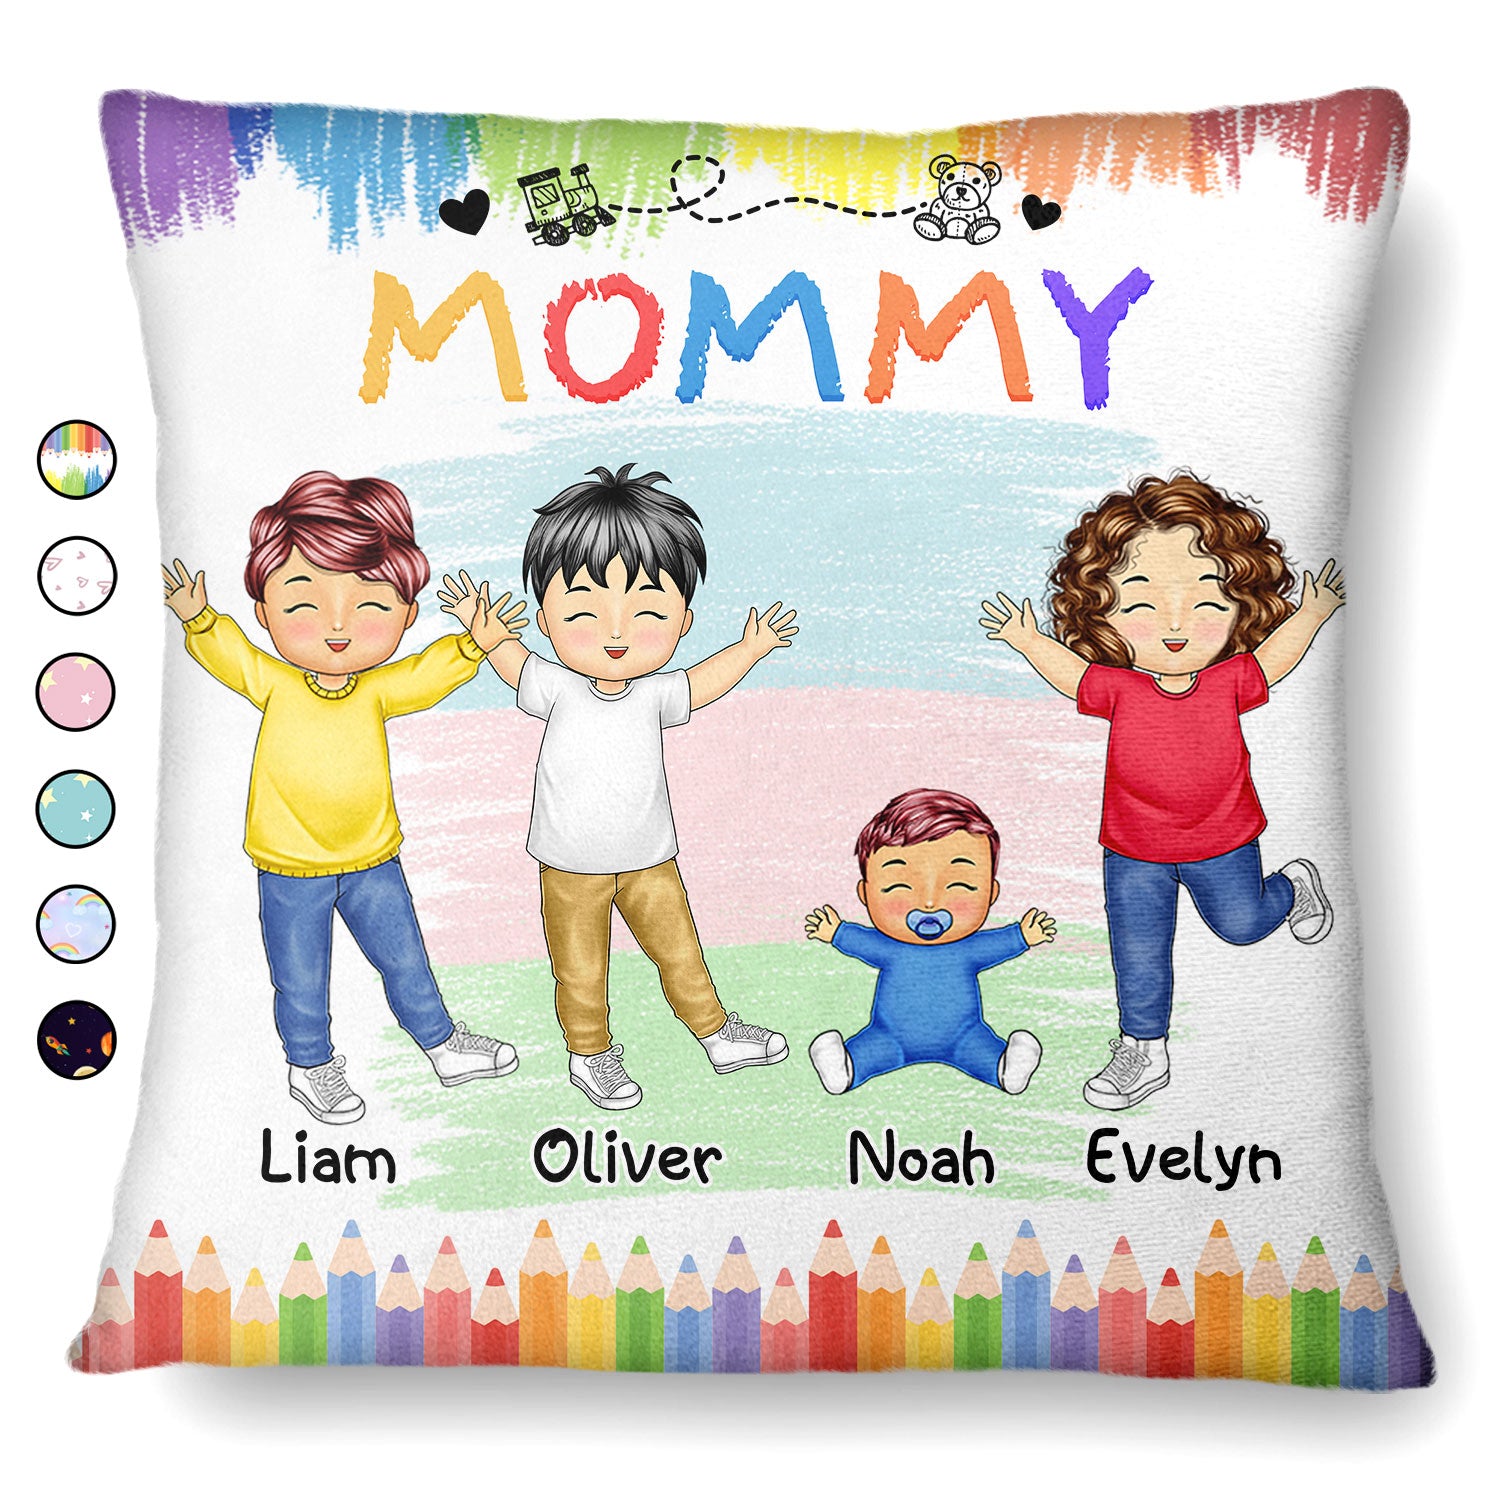 Nana Papa Mommy Daddy - Birthday, Loving Gift For Mother, Father, Grandma, Grandpa - Personalized Pillow